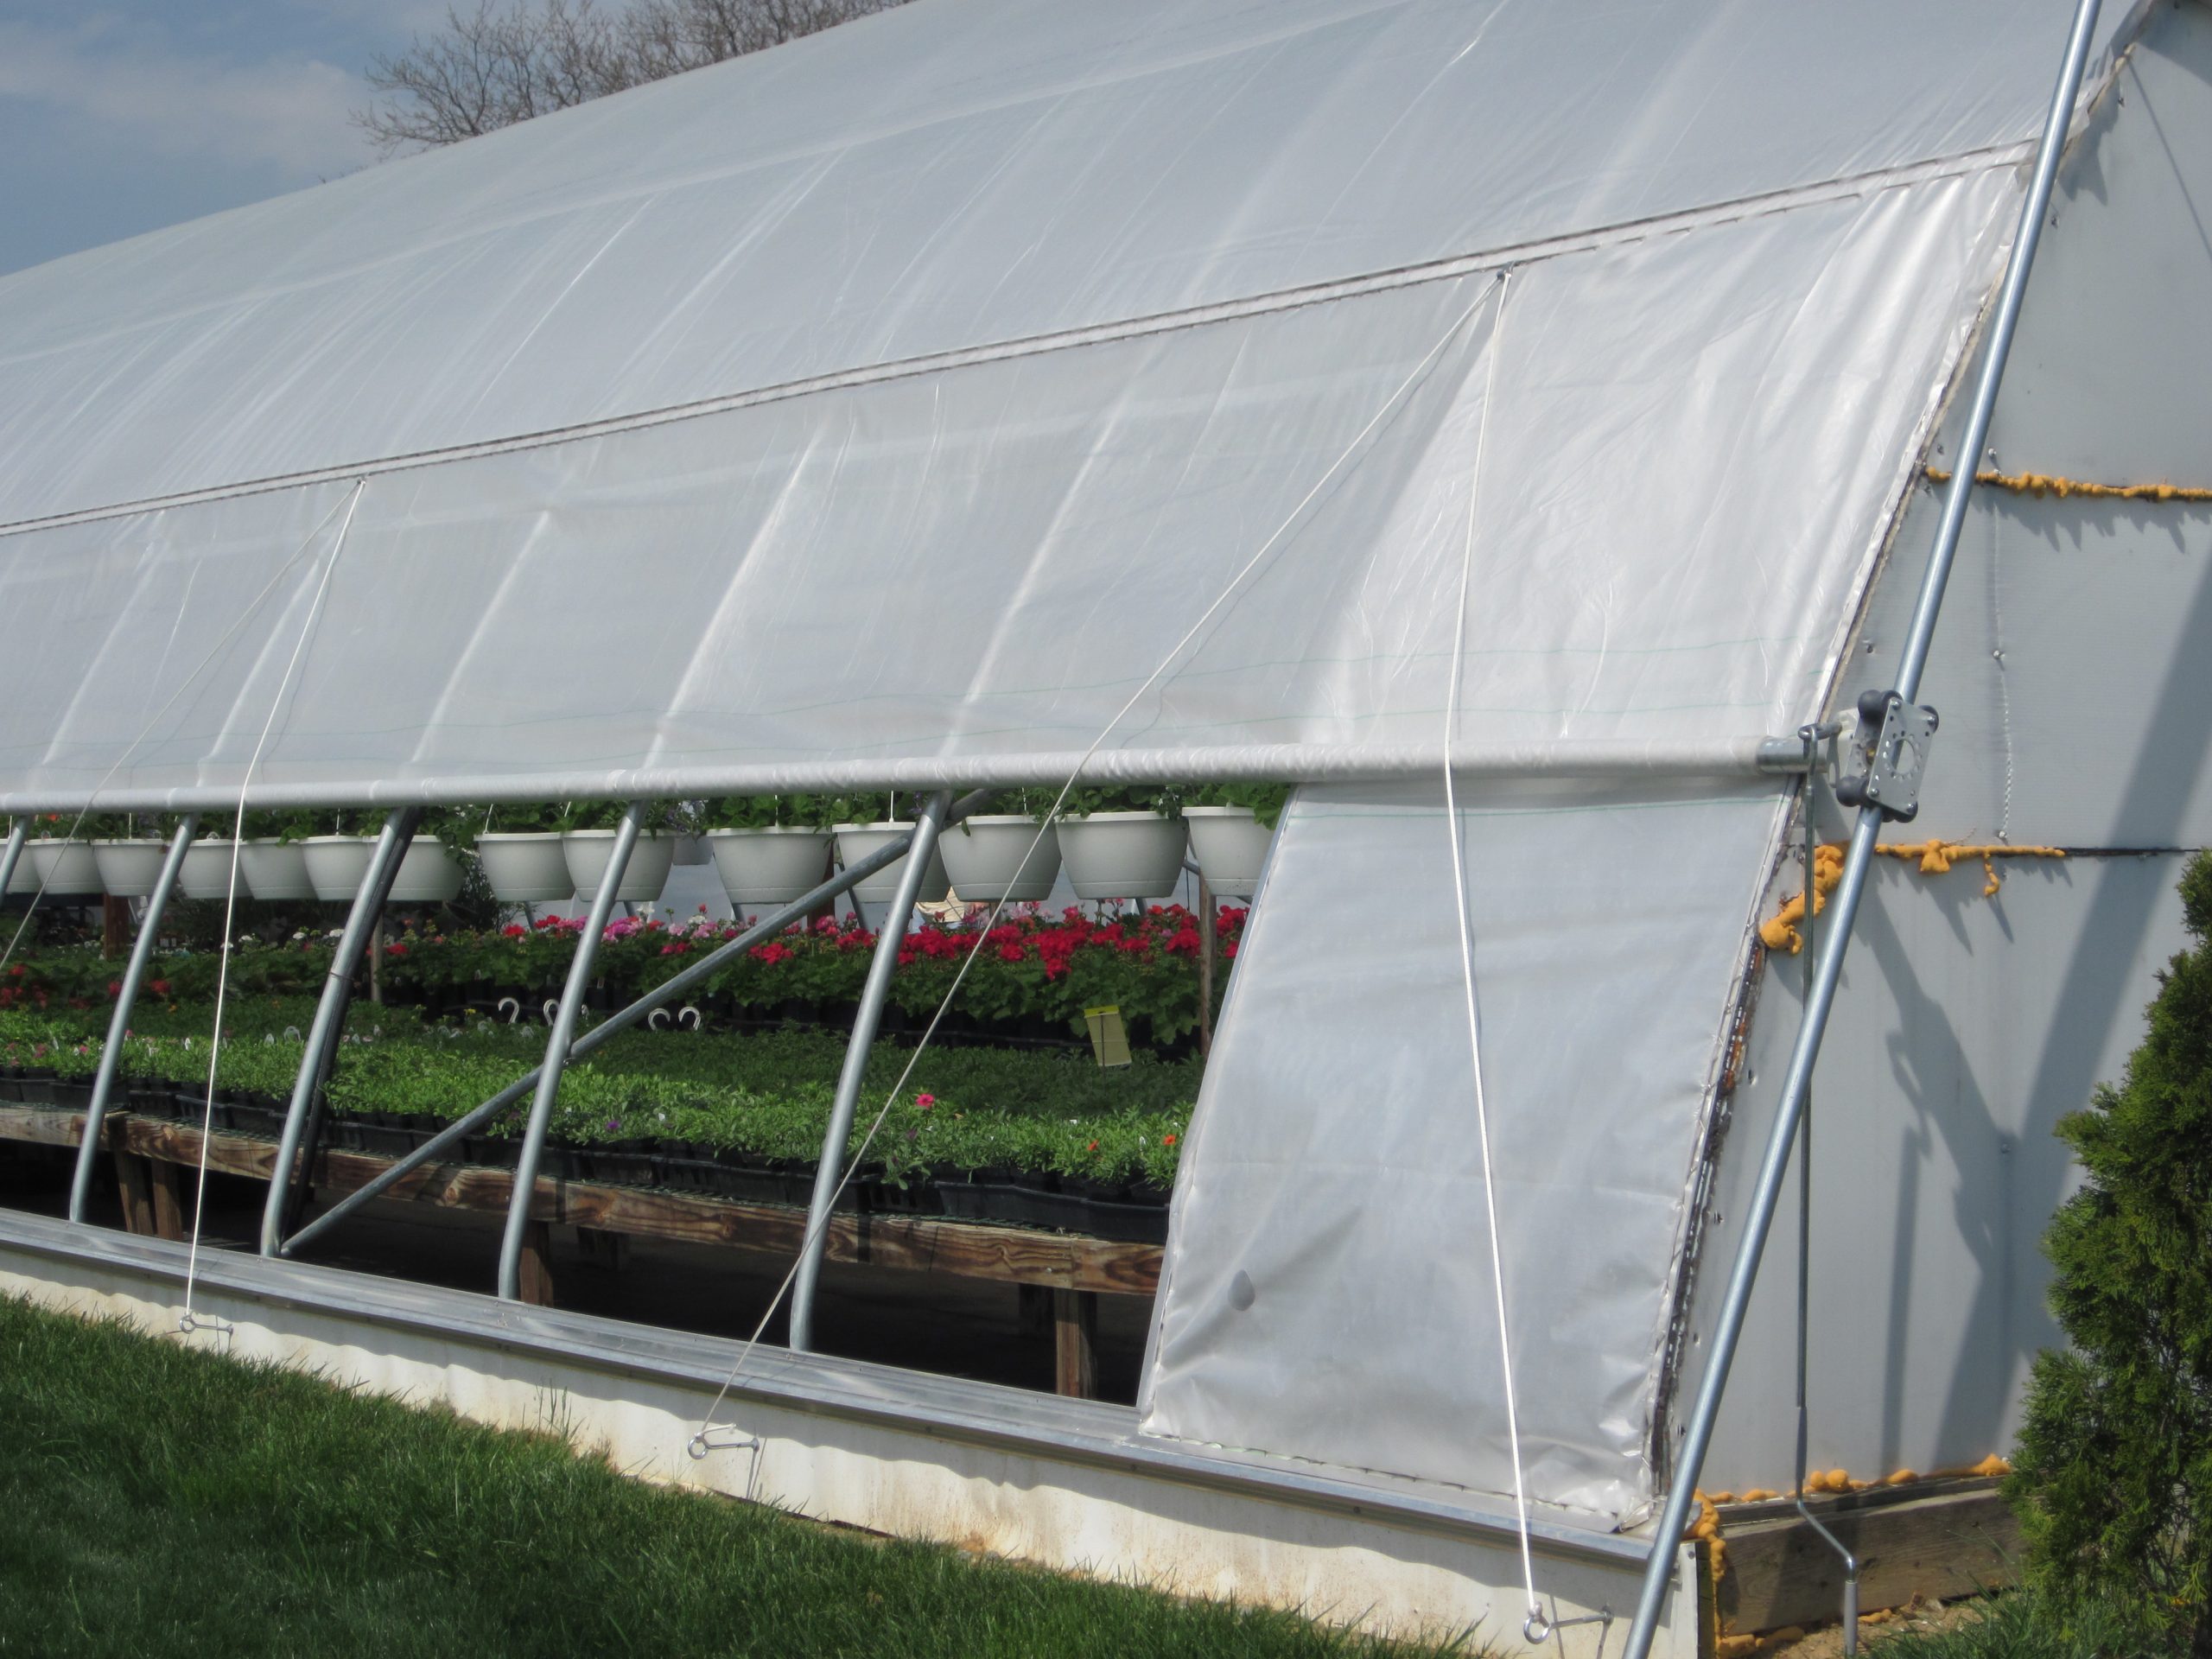 Arched Curtain For Greenhouse Ventilation Advancing Alternatives Advancing Alternatives